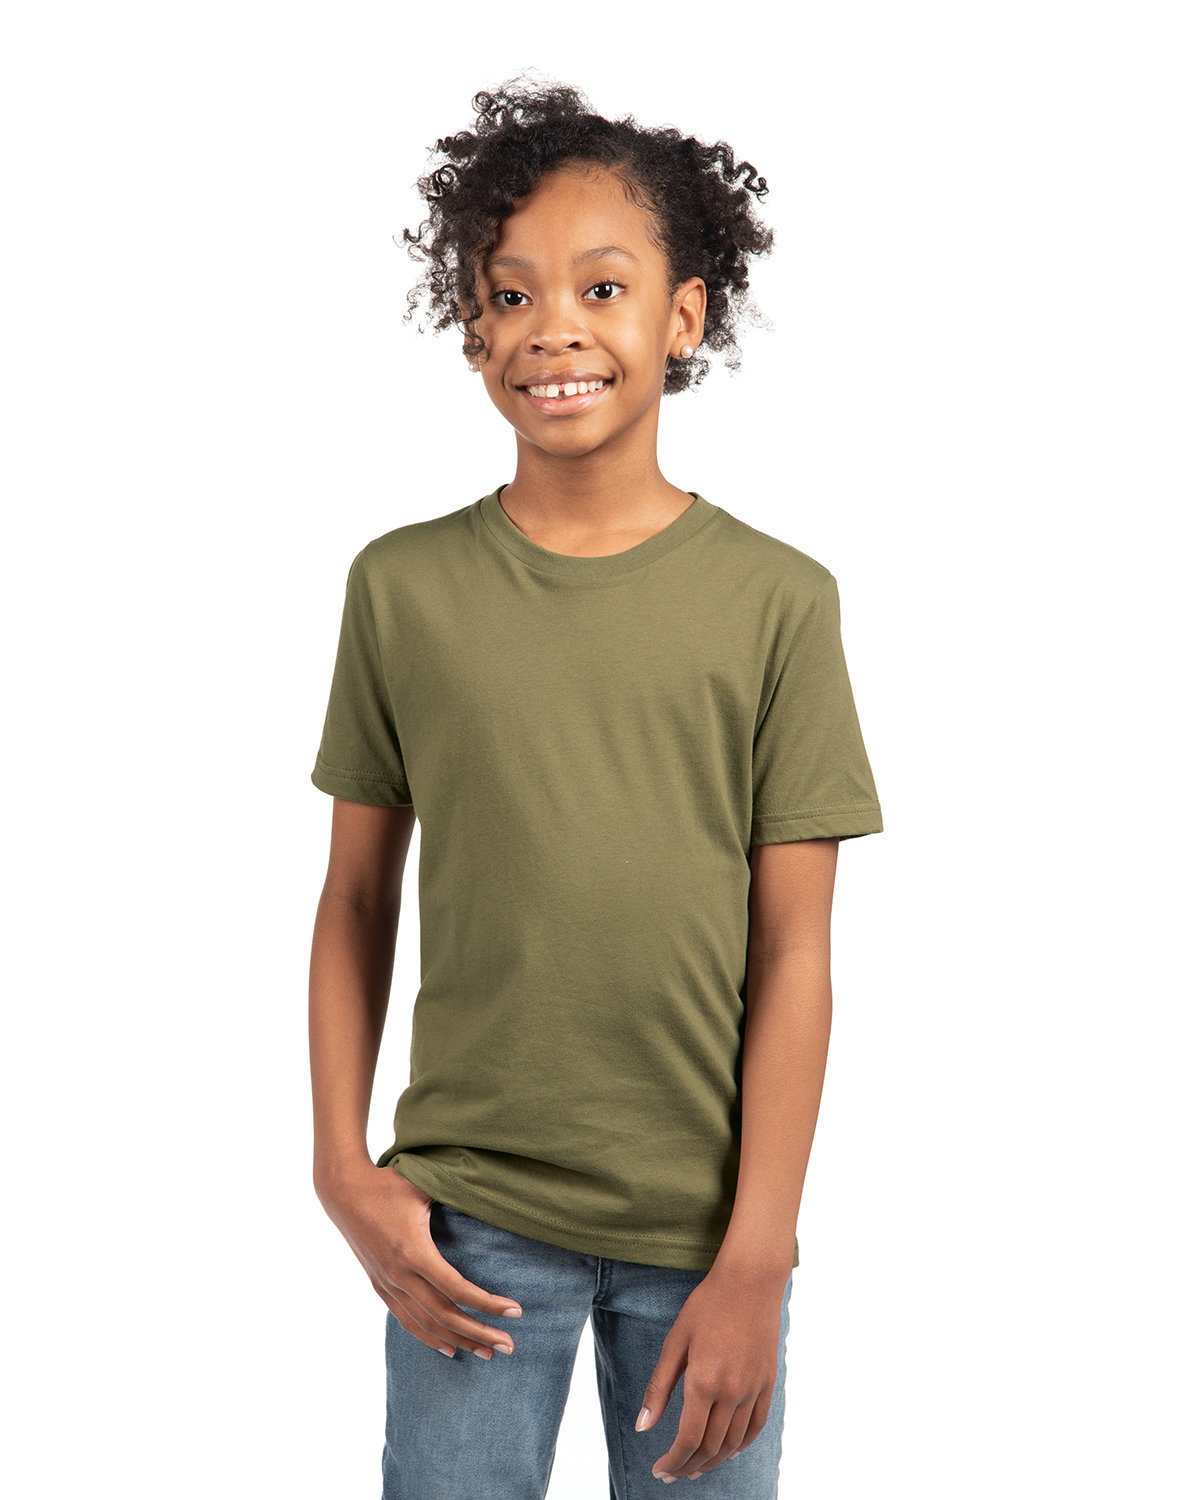 Next Level Apparel Youth Boys’ Cotton Crew MILITARY GREEN 